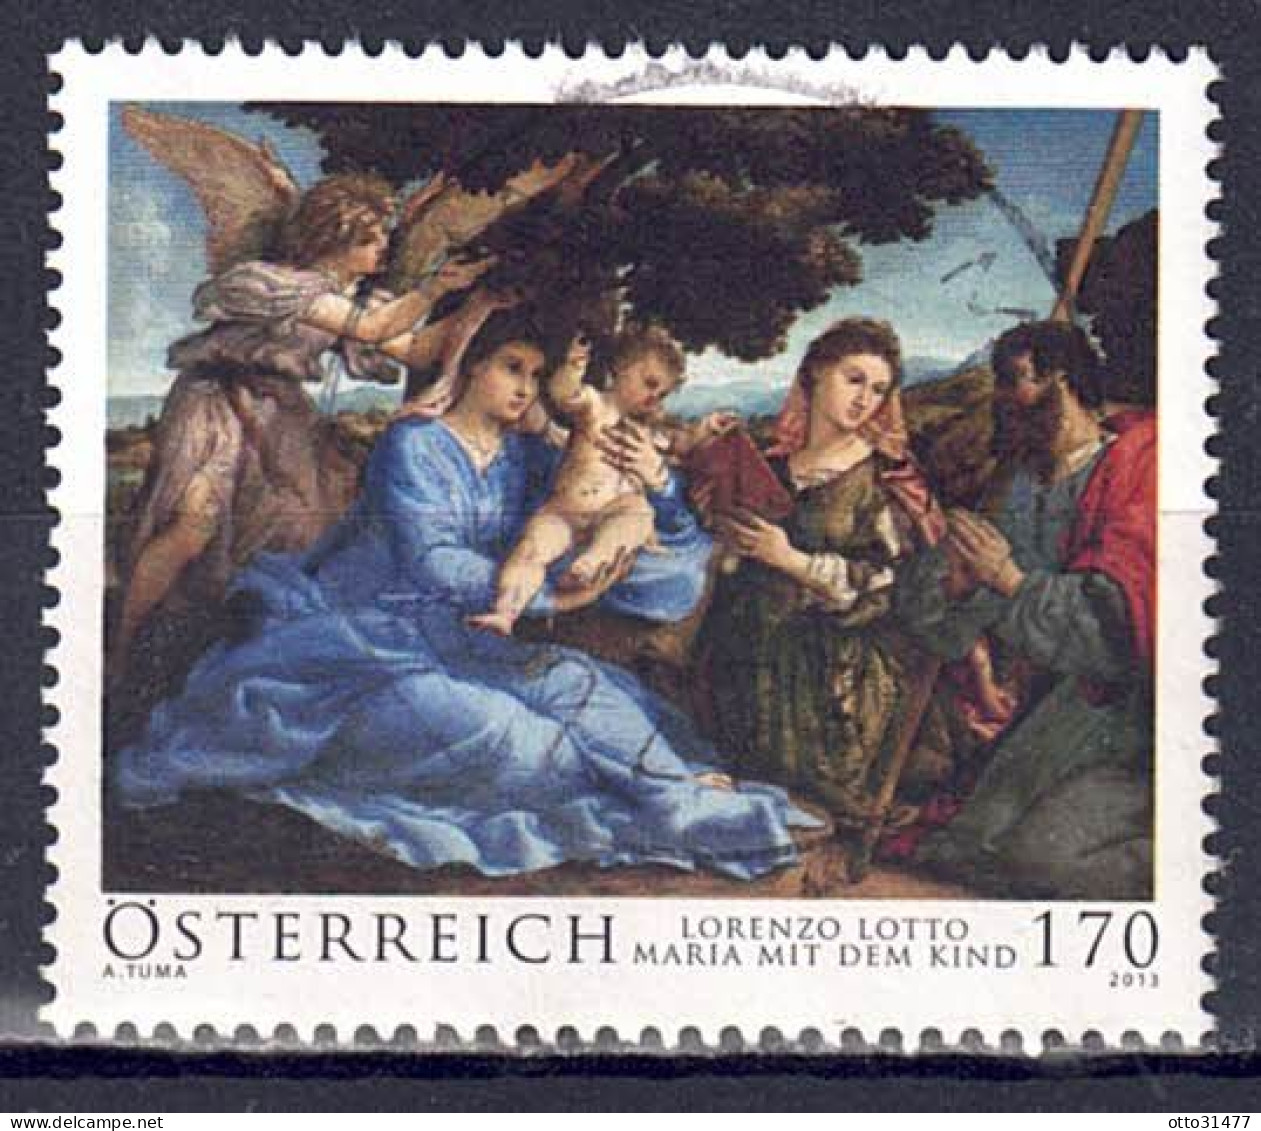 Österreich 2013 - Alte Meister (III), MiNr. 3101, Gestempelt / Used - Used Stamps